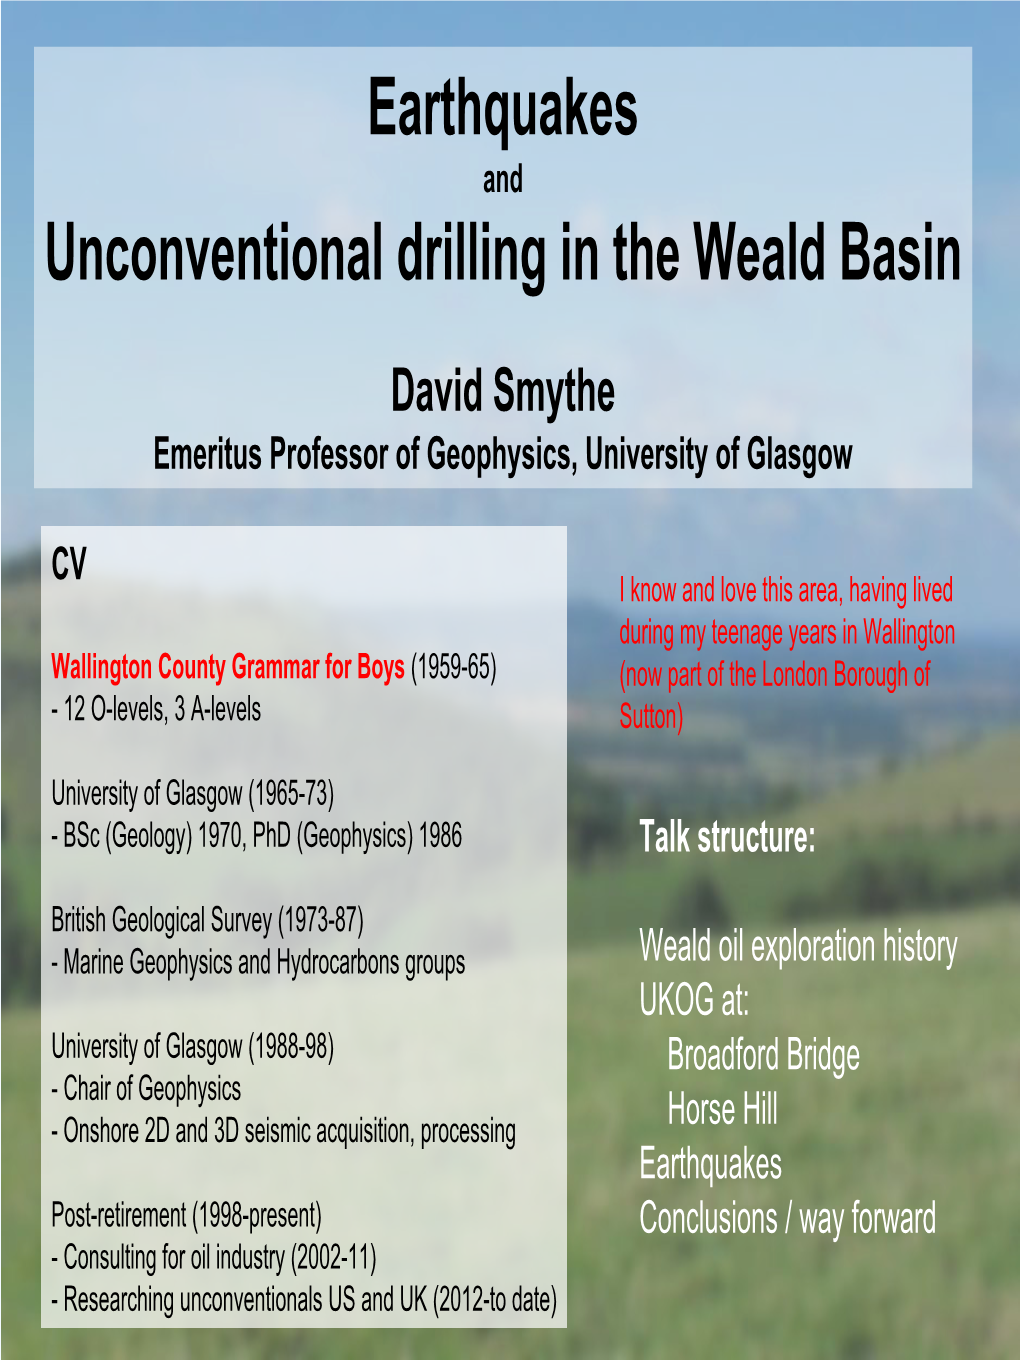 Earthquakes Unconventional Drilling in the Weald Basin